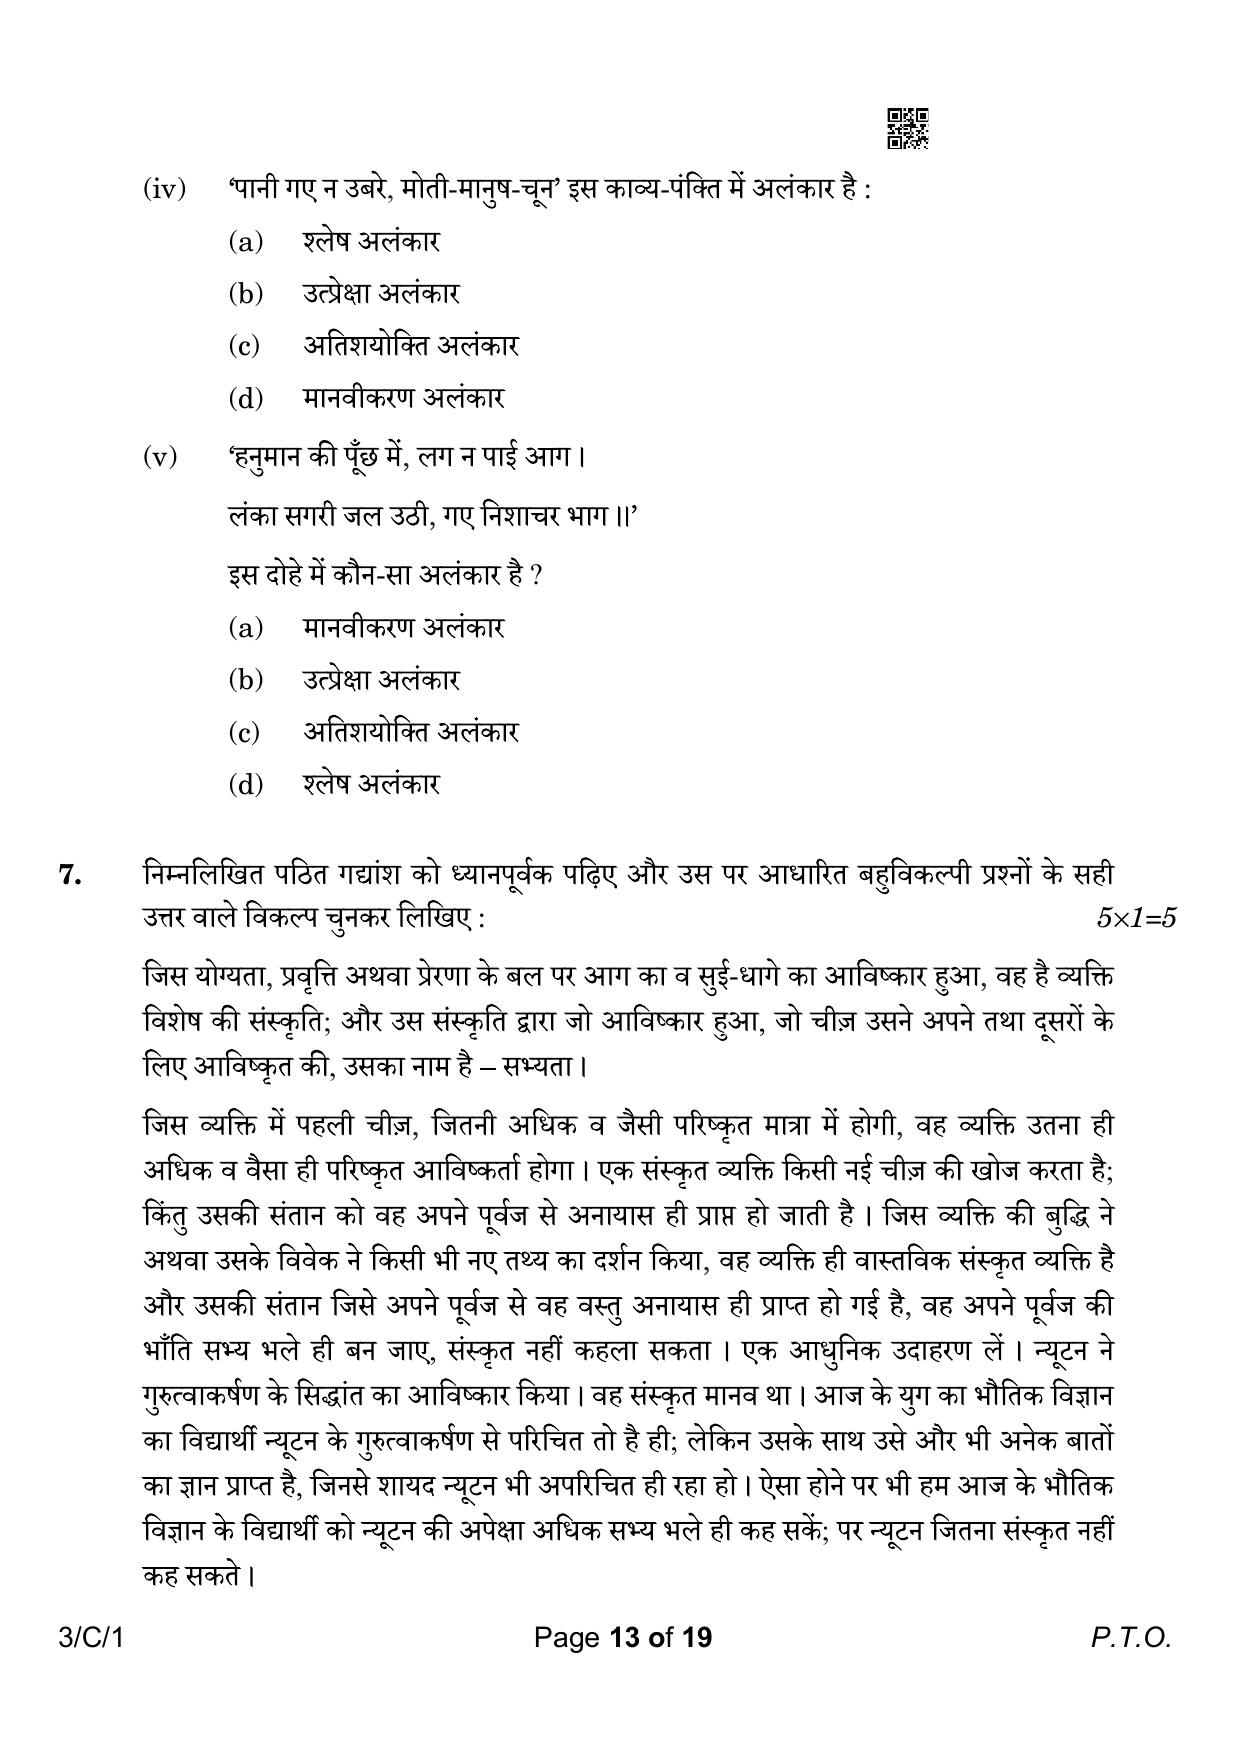 CBSE Class 10 3-1 Hindi A 2023 (Compartment) Question Paper - Page 13